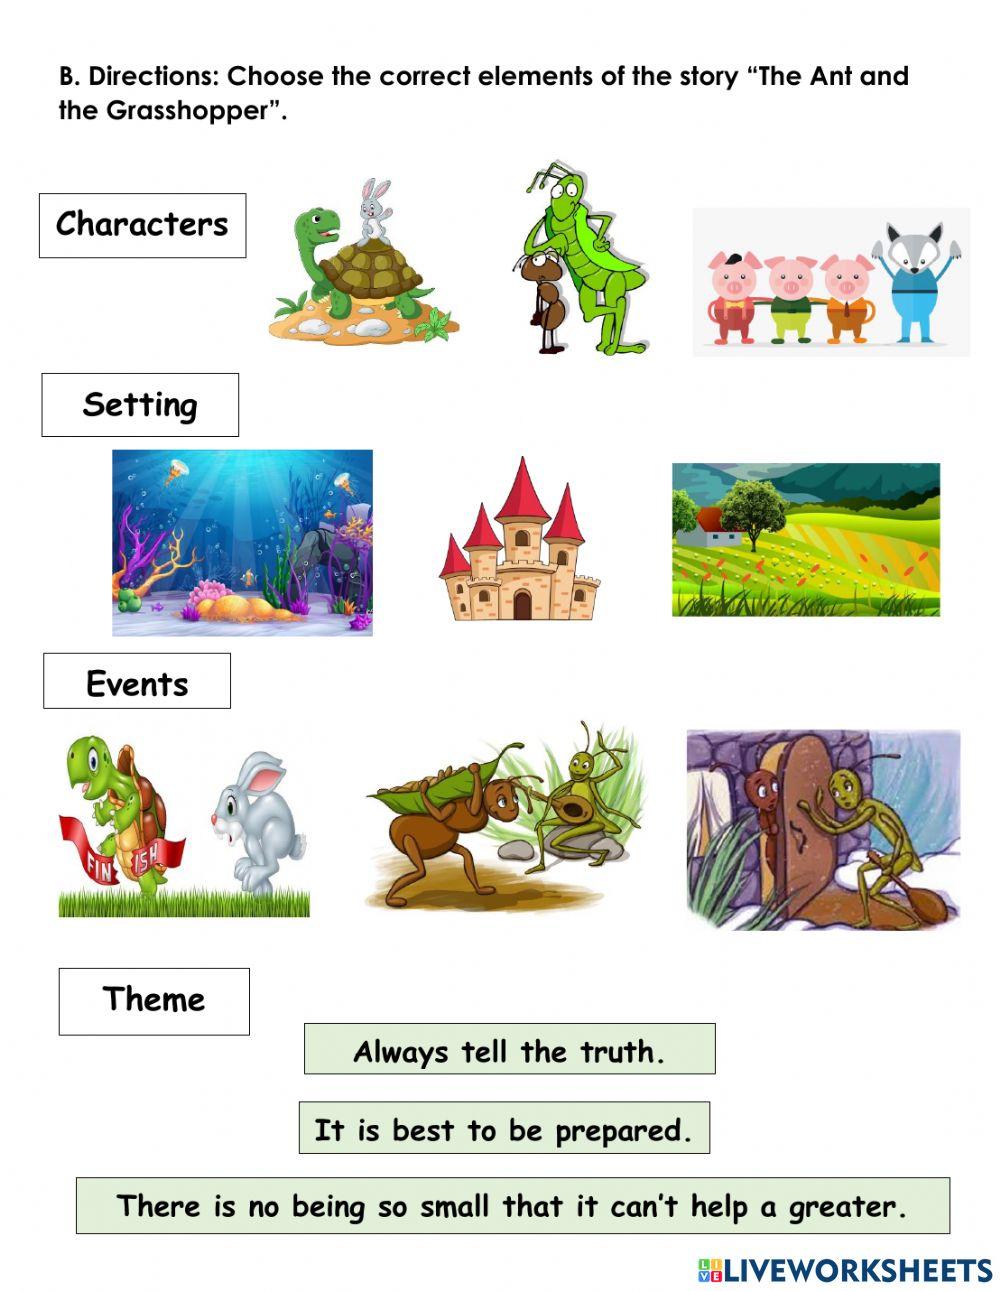 English - Elements of the Story